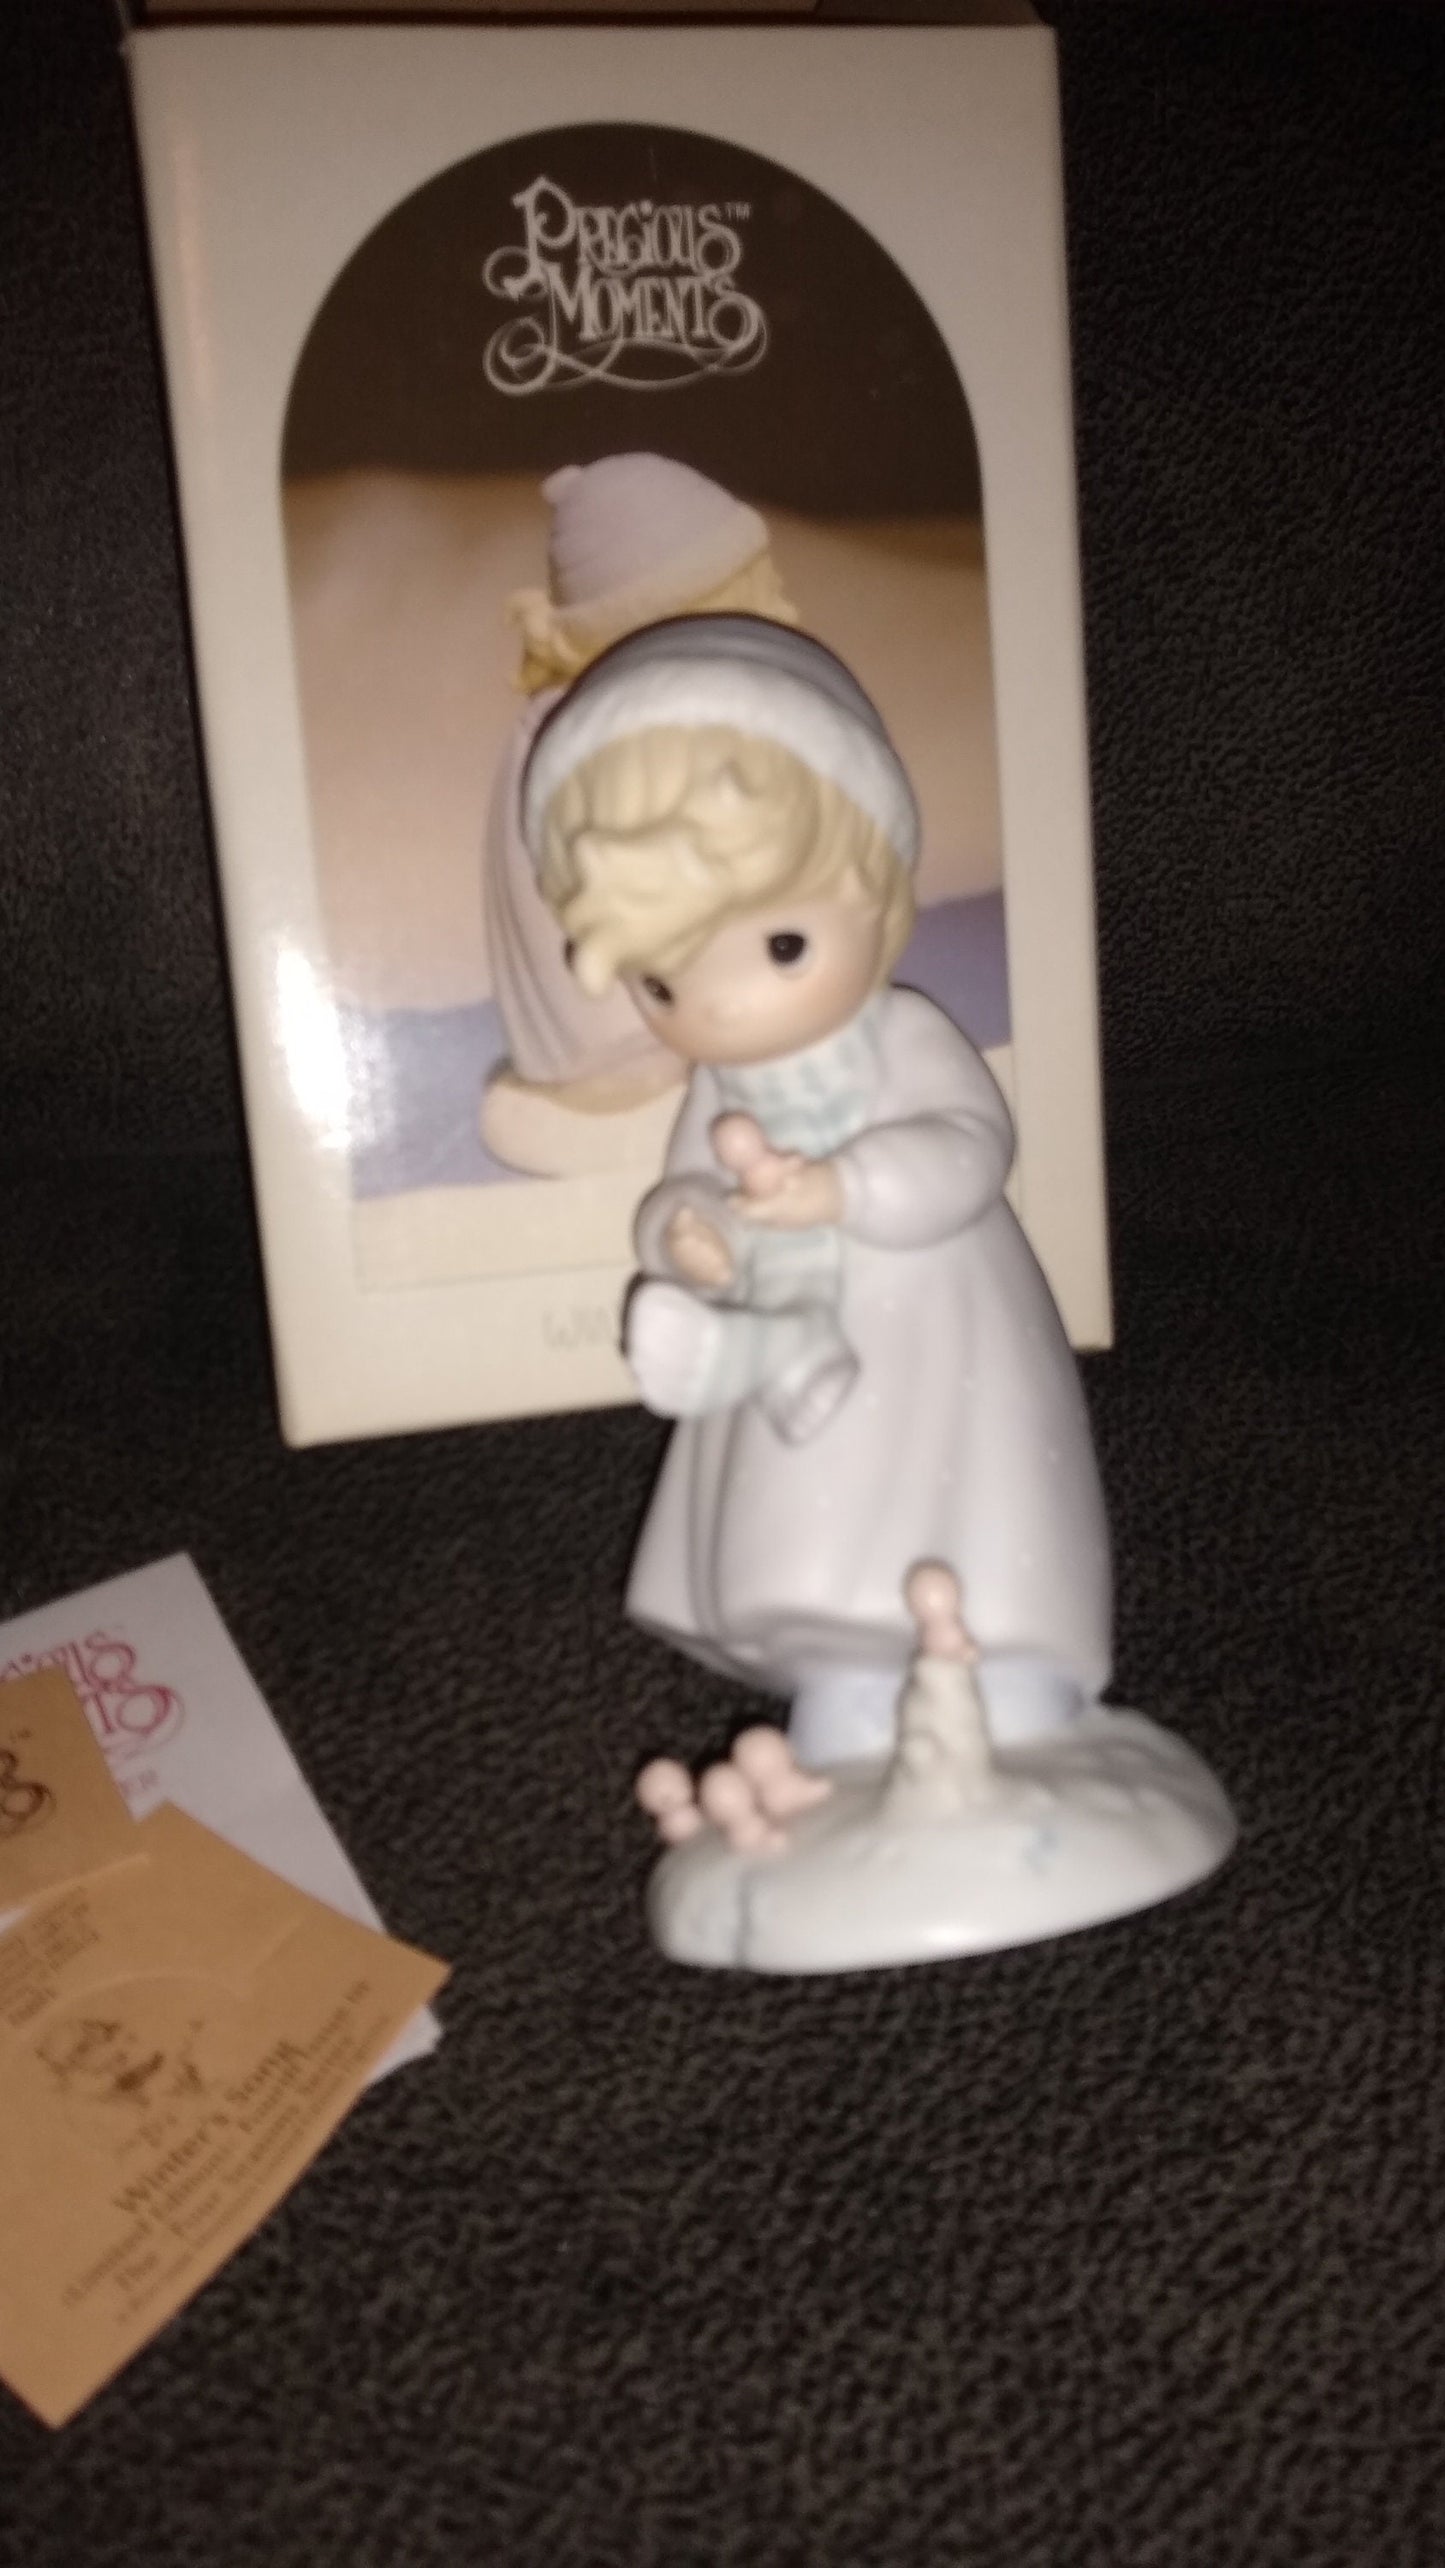 Vintage Precious Moments Figurine Of A Girl Holding A Bird, Winter's Song By Enesco 1984. 